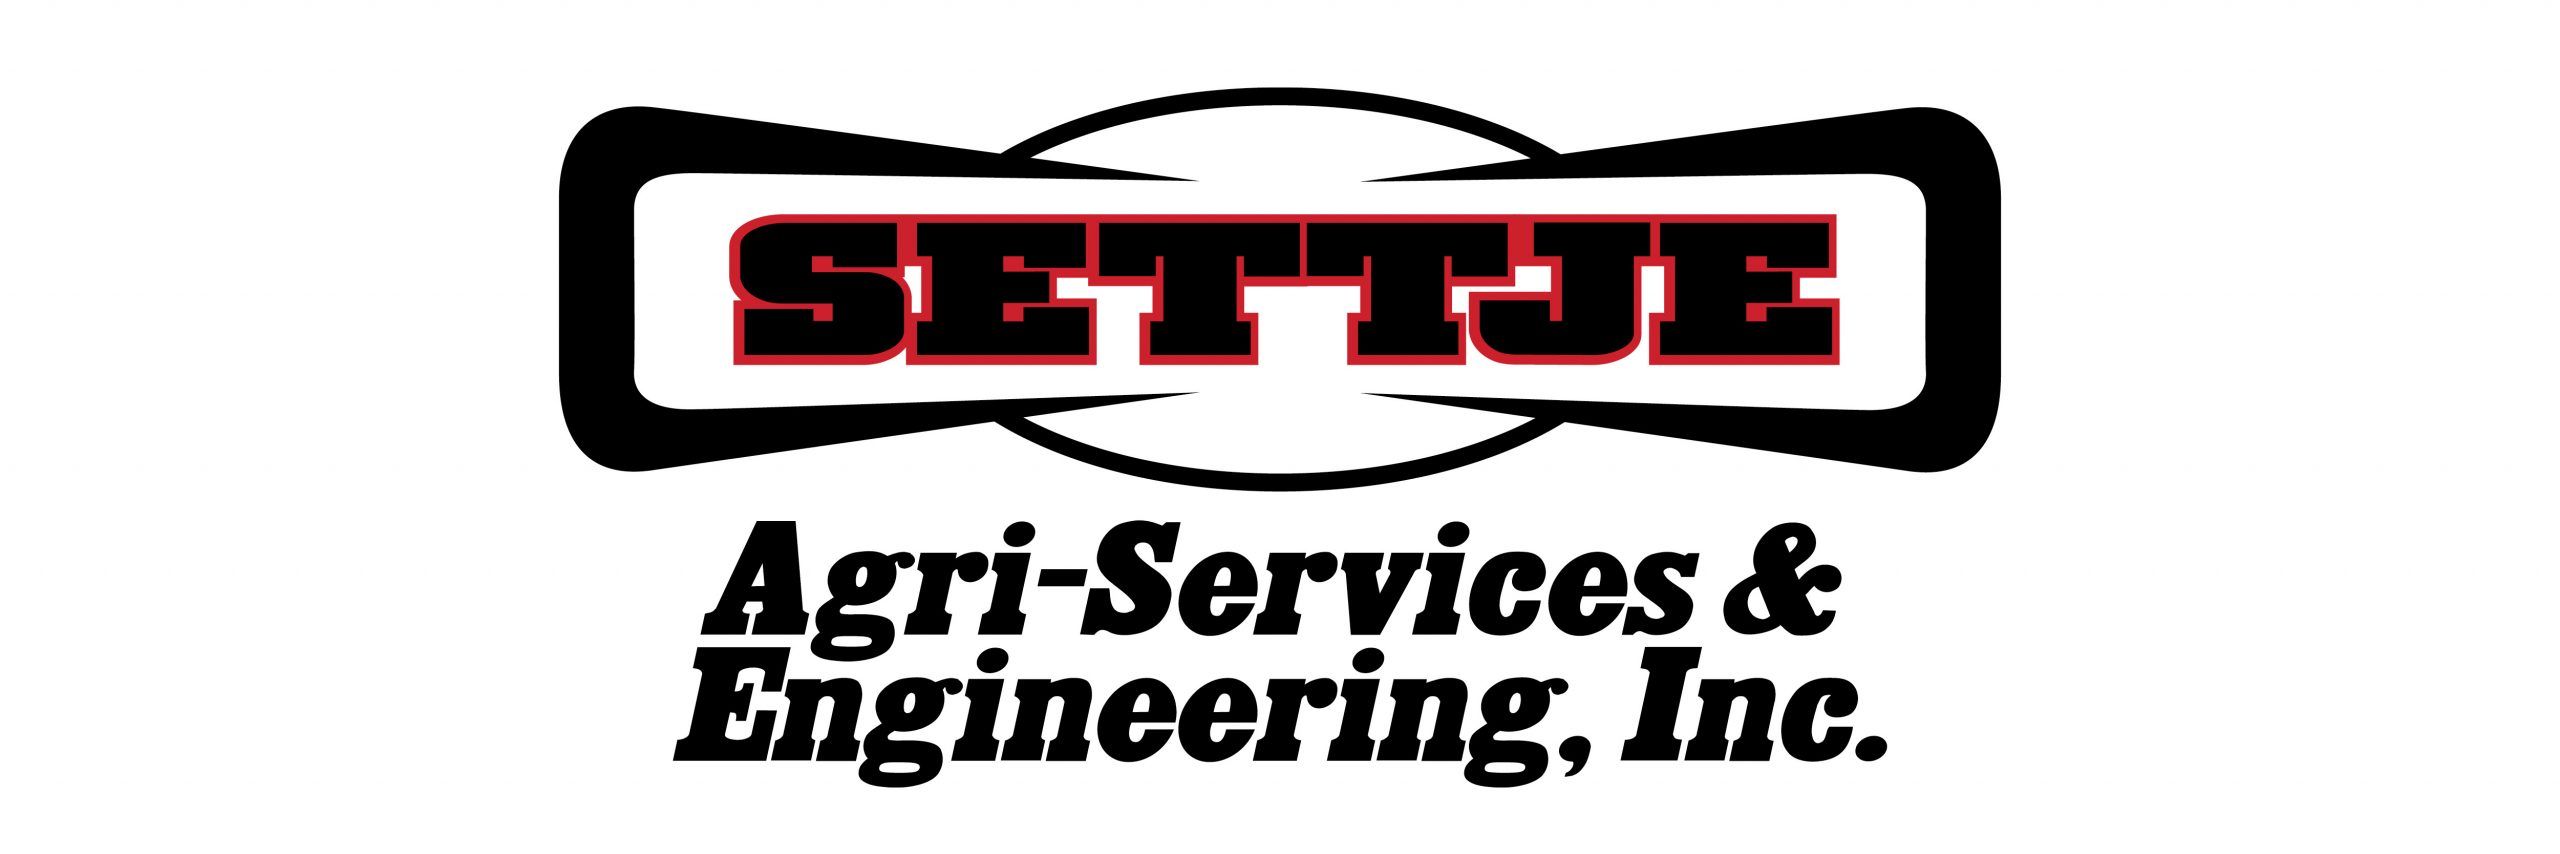 Summit Designates Settje Agri-Services and Engineering, Inc. as Its Preferred Construction Company West of The Mississippi River